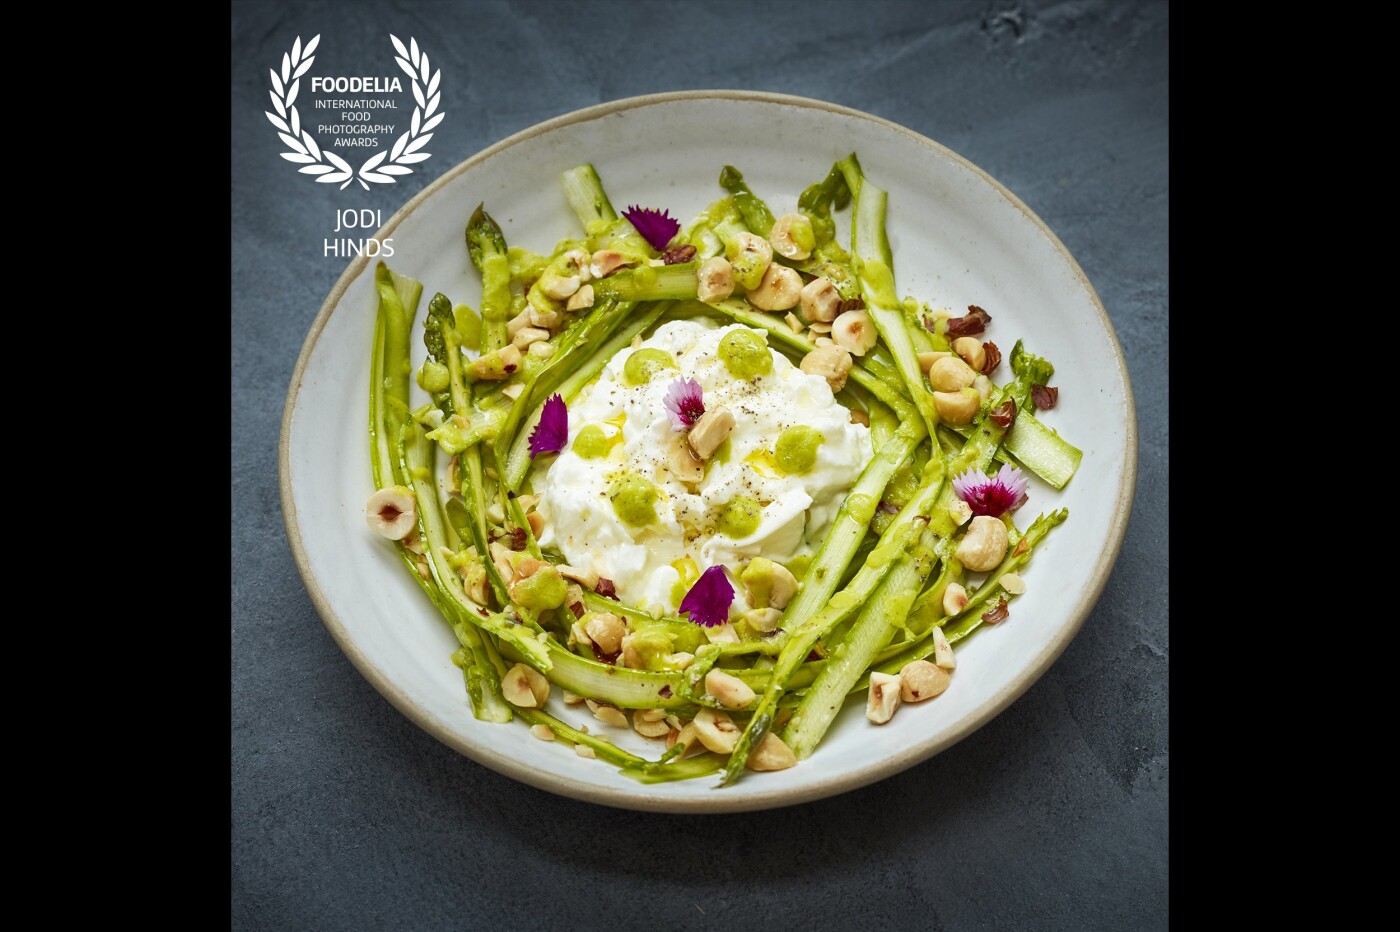 Luscious burrata dish with shaved asparagus and hazelnuts<br />
Restaurant: @fucinalondon<br />
Campaign: @thisismission<br />
Production: @theforge.co<br />
Styling: @iaingrahamchef<br />
Photographer: @jodihindsphoto<br />
